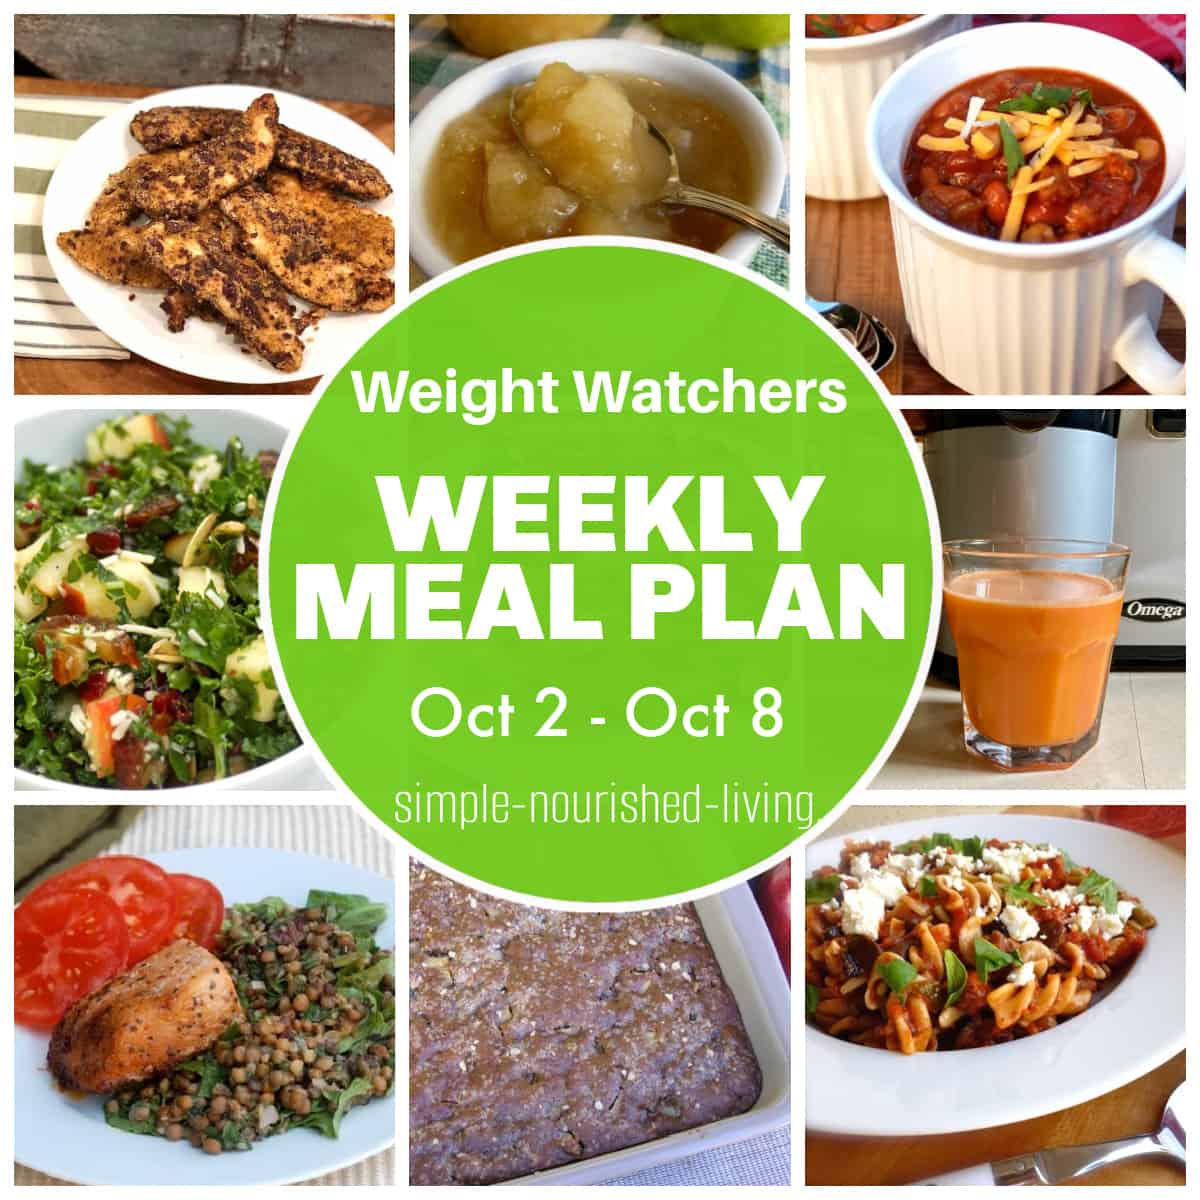 What I am planning to cook and eat on Weight Watchers this week: featuring pickle juice chicken tenders, pumpkin chia pudding, slow cooker turkey sausage chili, kale salad with apples and dates, carrot, beet juice, warm lentil salad with salmon, fresh apple cake, chicken tomato feta pasta